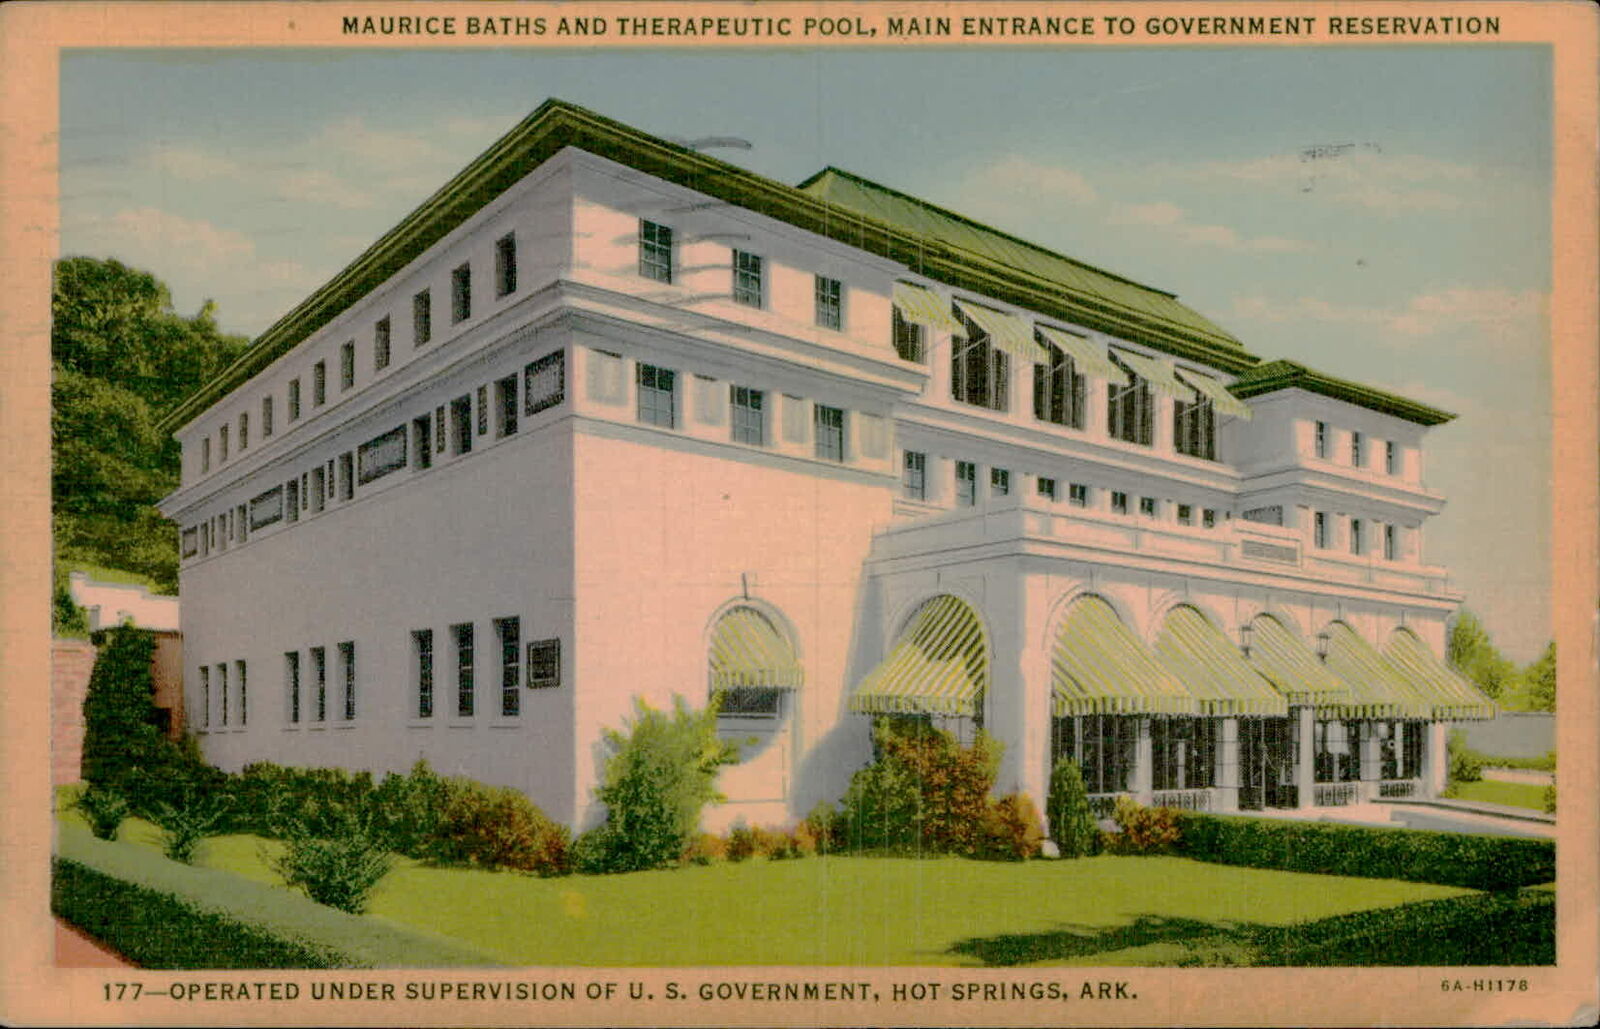 Postcard: MAURICE BATHS AND THERAPEUTIC POOL, MAIN ENTRANCE